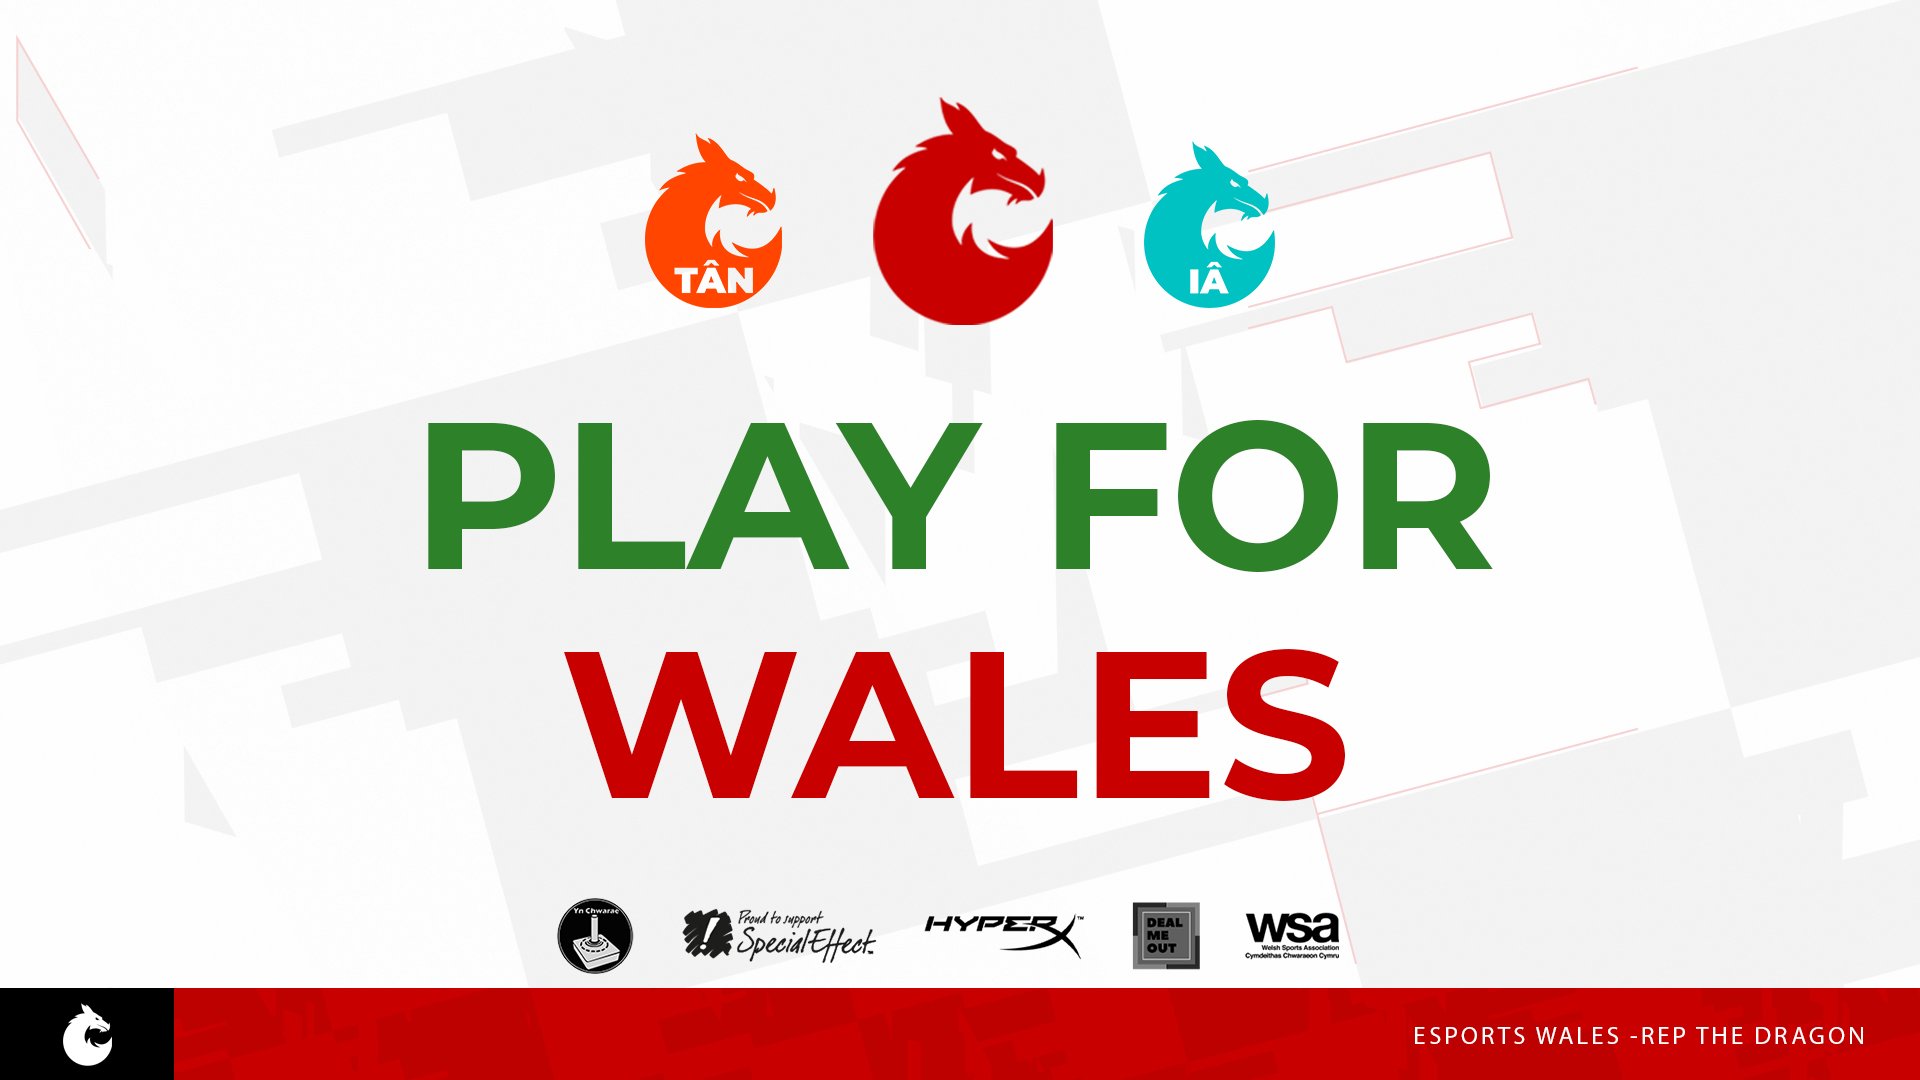 Esports Wales hosting online tournaments to find the best players in Wales